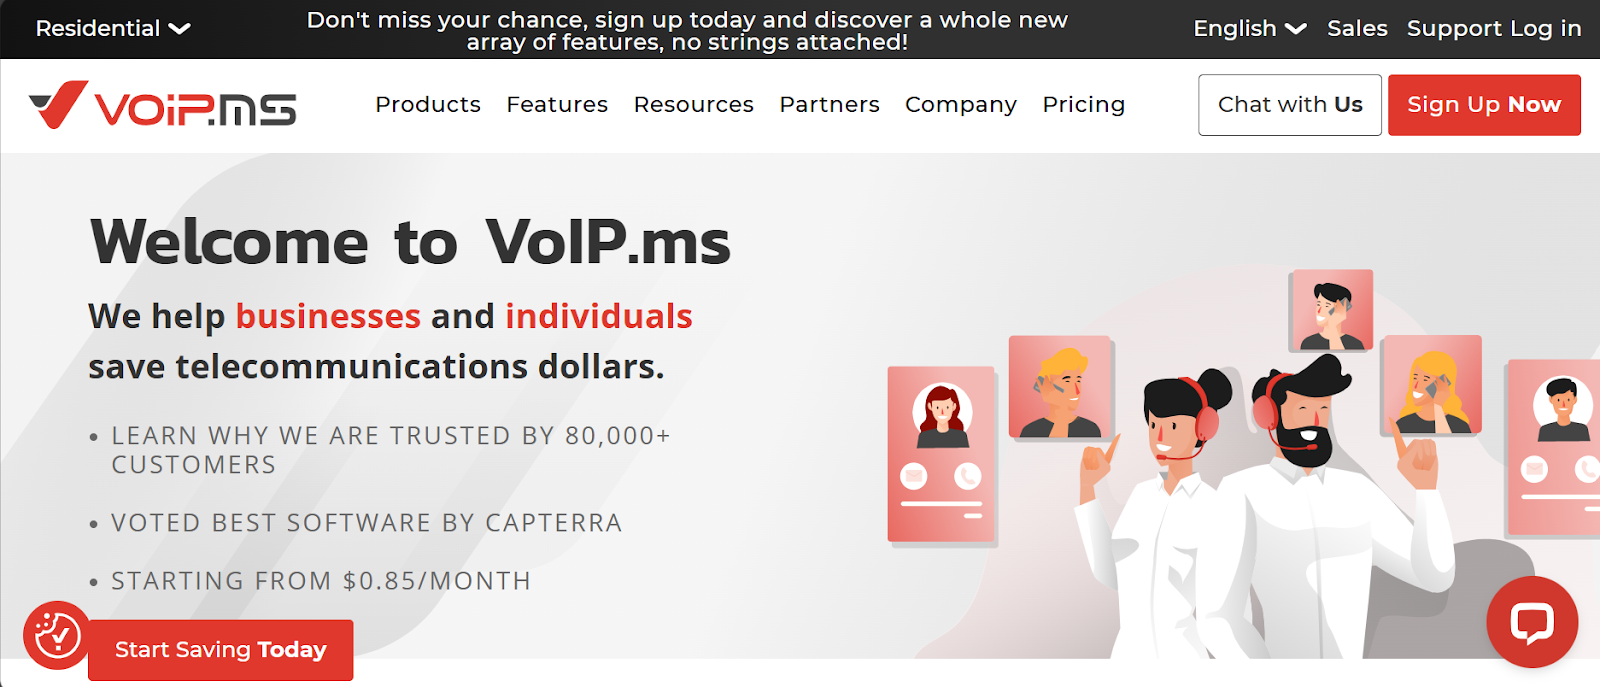 VoIP.ms website snapshot highlighting the services it offers.